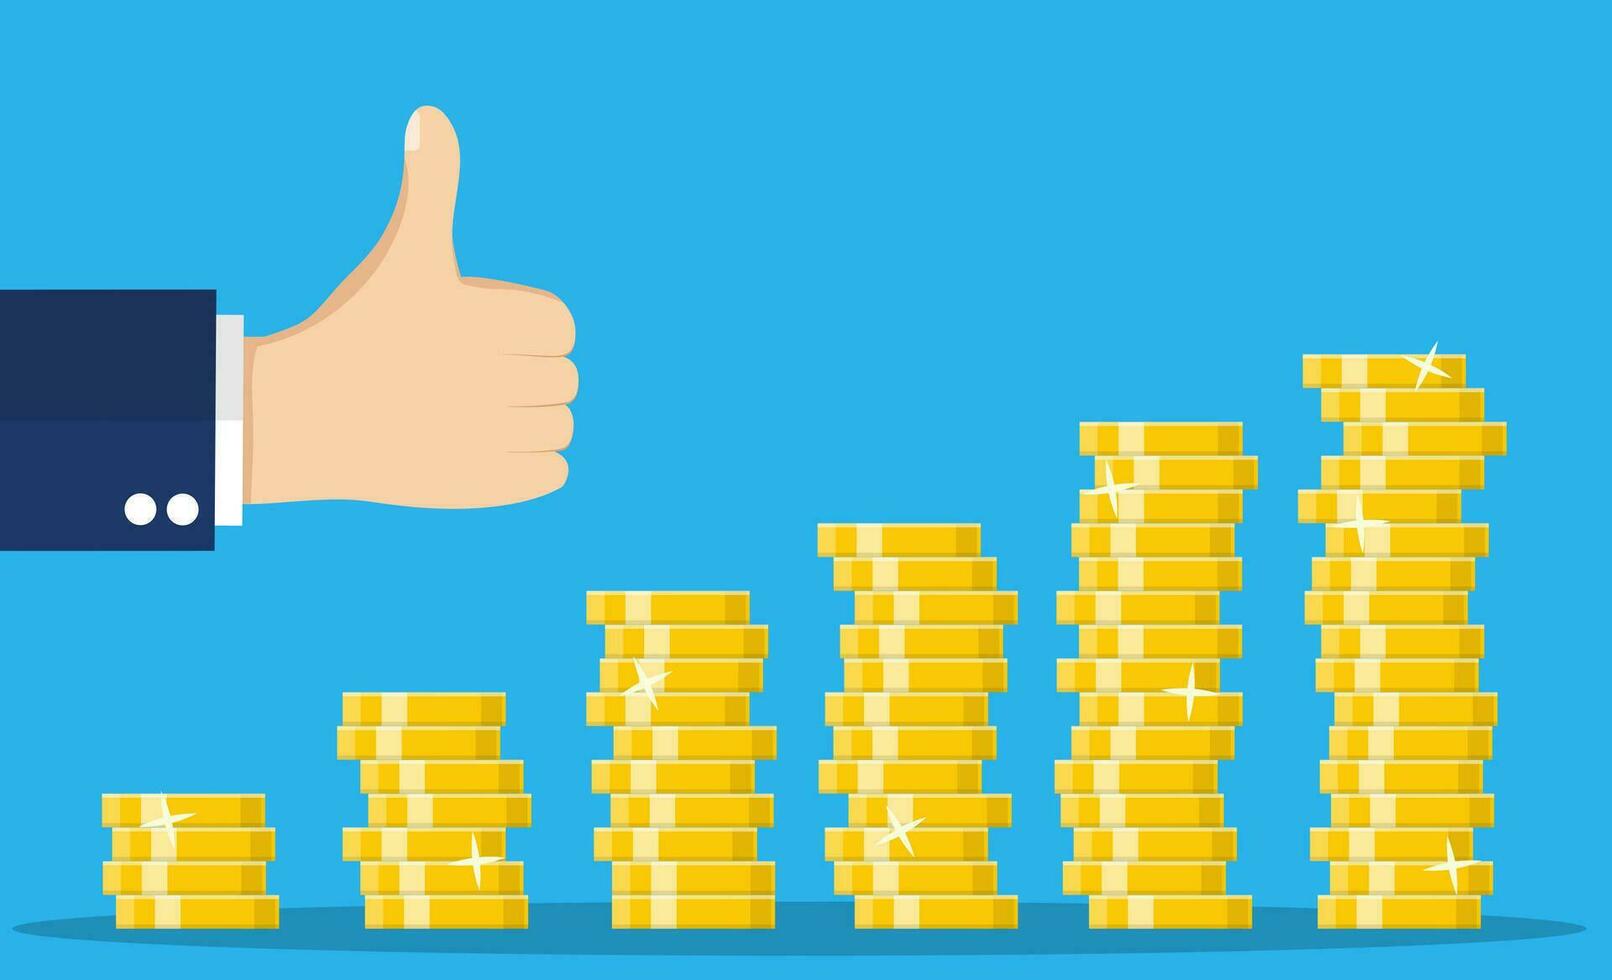 Stack of gold coins and hand with thumb up gesture. Golden coin with dollar sign. Growth, income, savings, investment. Symbol of wealth. Business success. vector illustration in flat style